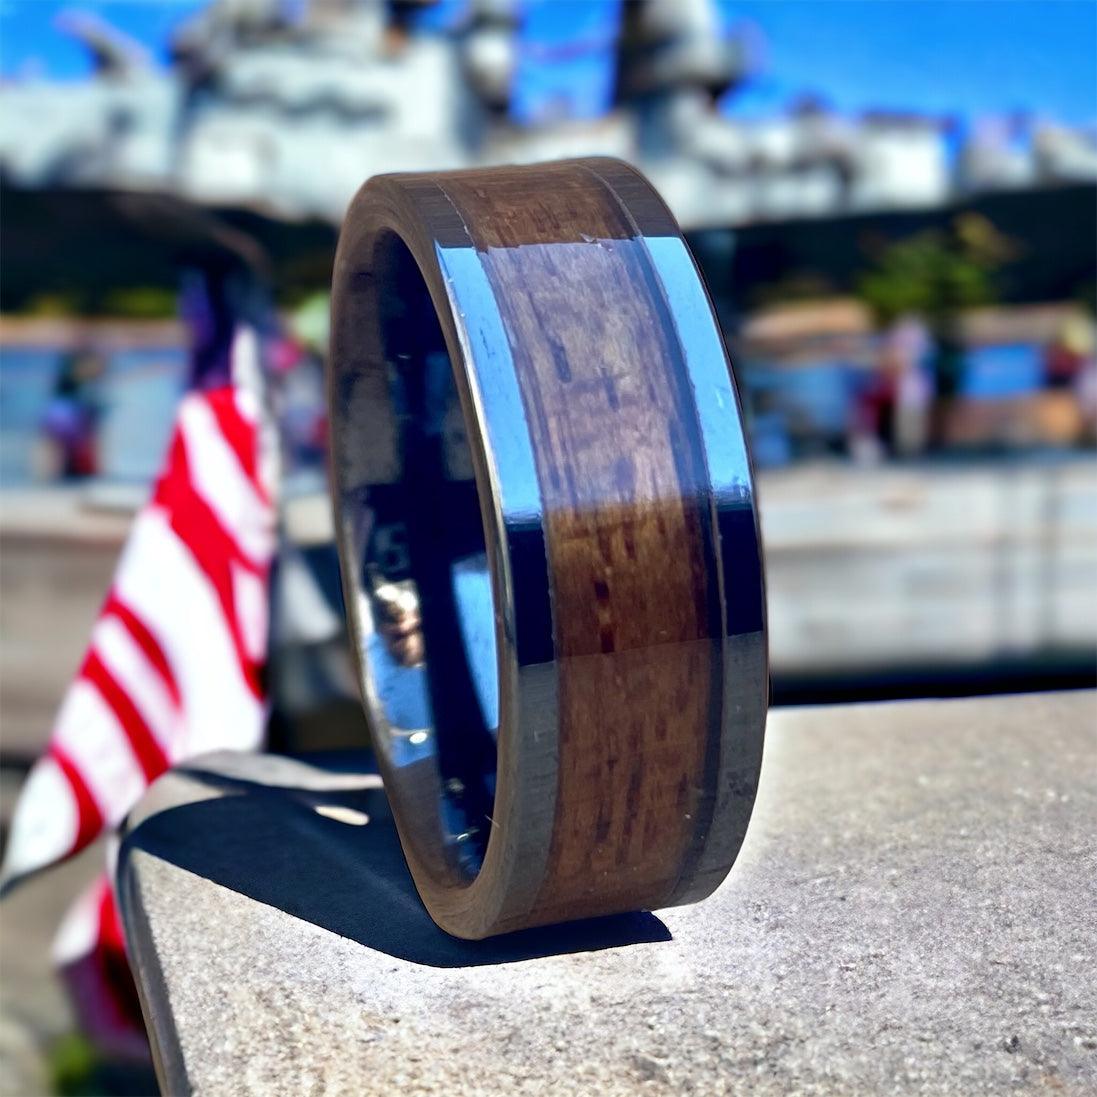 BW James Jewelers ALT Wedding Band "The Battleship" 100% USA Made Black Ceramic Ring With Wood From The USS California